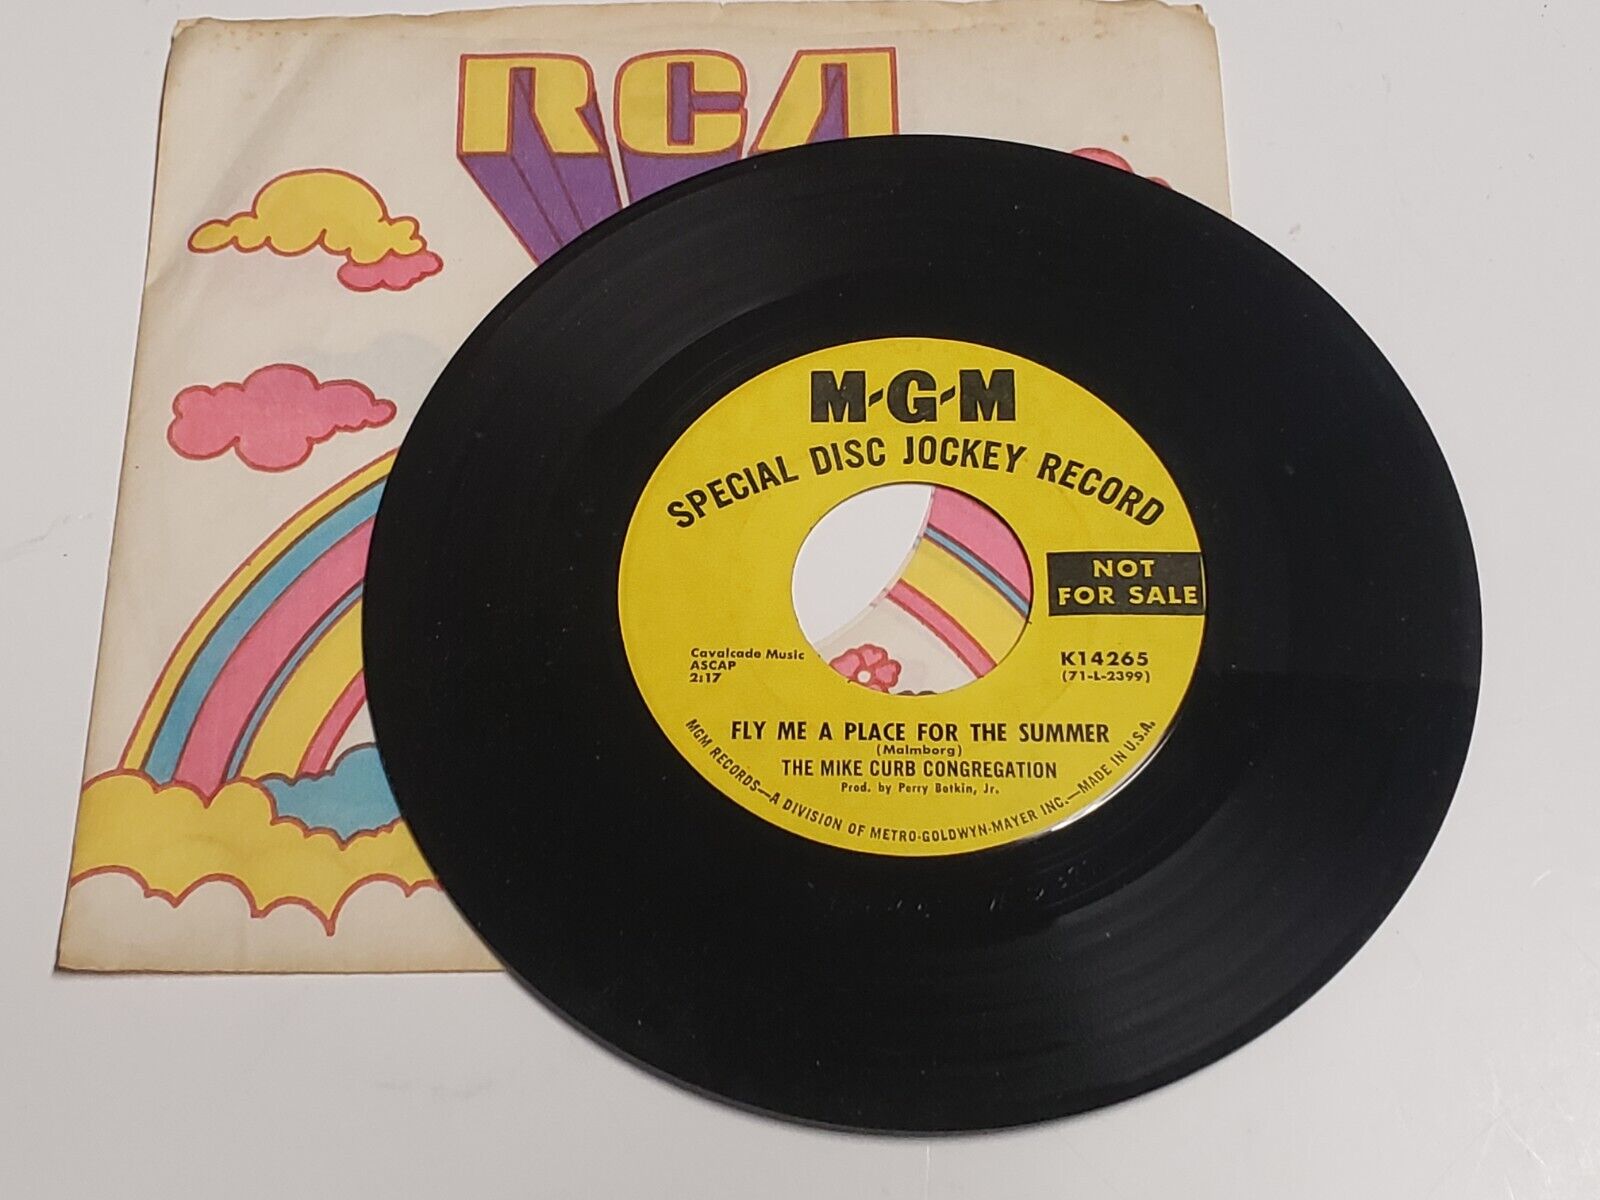 Vtg 1971 45 RPM Mike Curb Congregation – Fly Me A Place For The Summer PROMO VG+